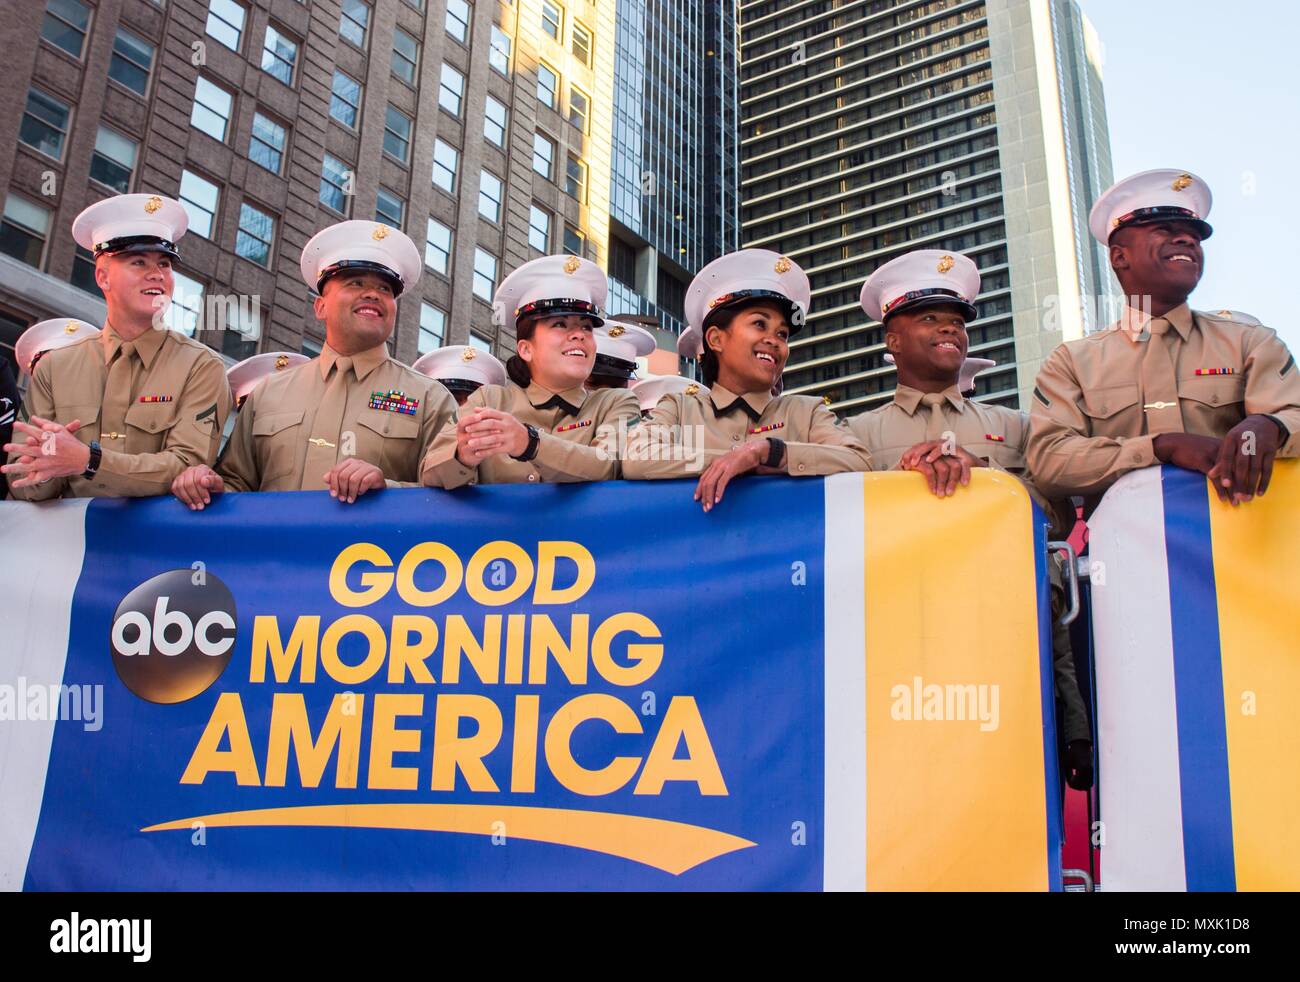 Marines wait for their chance to be seen on the ABC Good Morning America television show at Times Square in New York City, N.Y., Nov. 11, 2016. Marines from local units are participating in Veterans Week New York City 2016 to honor the service of all our nation’s veterans. The Marines are with II Marine Expeditionary Unit. (U.S. Marine Corps Photo by Sgt. Anthony Mesa.) Stock Photo